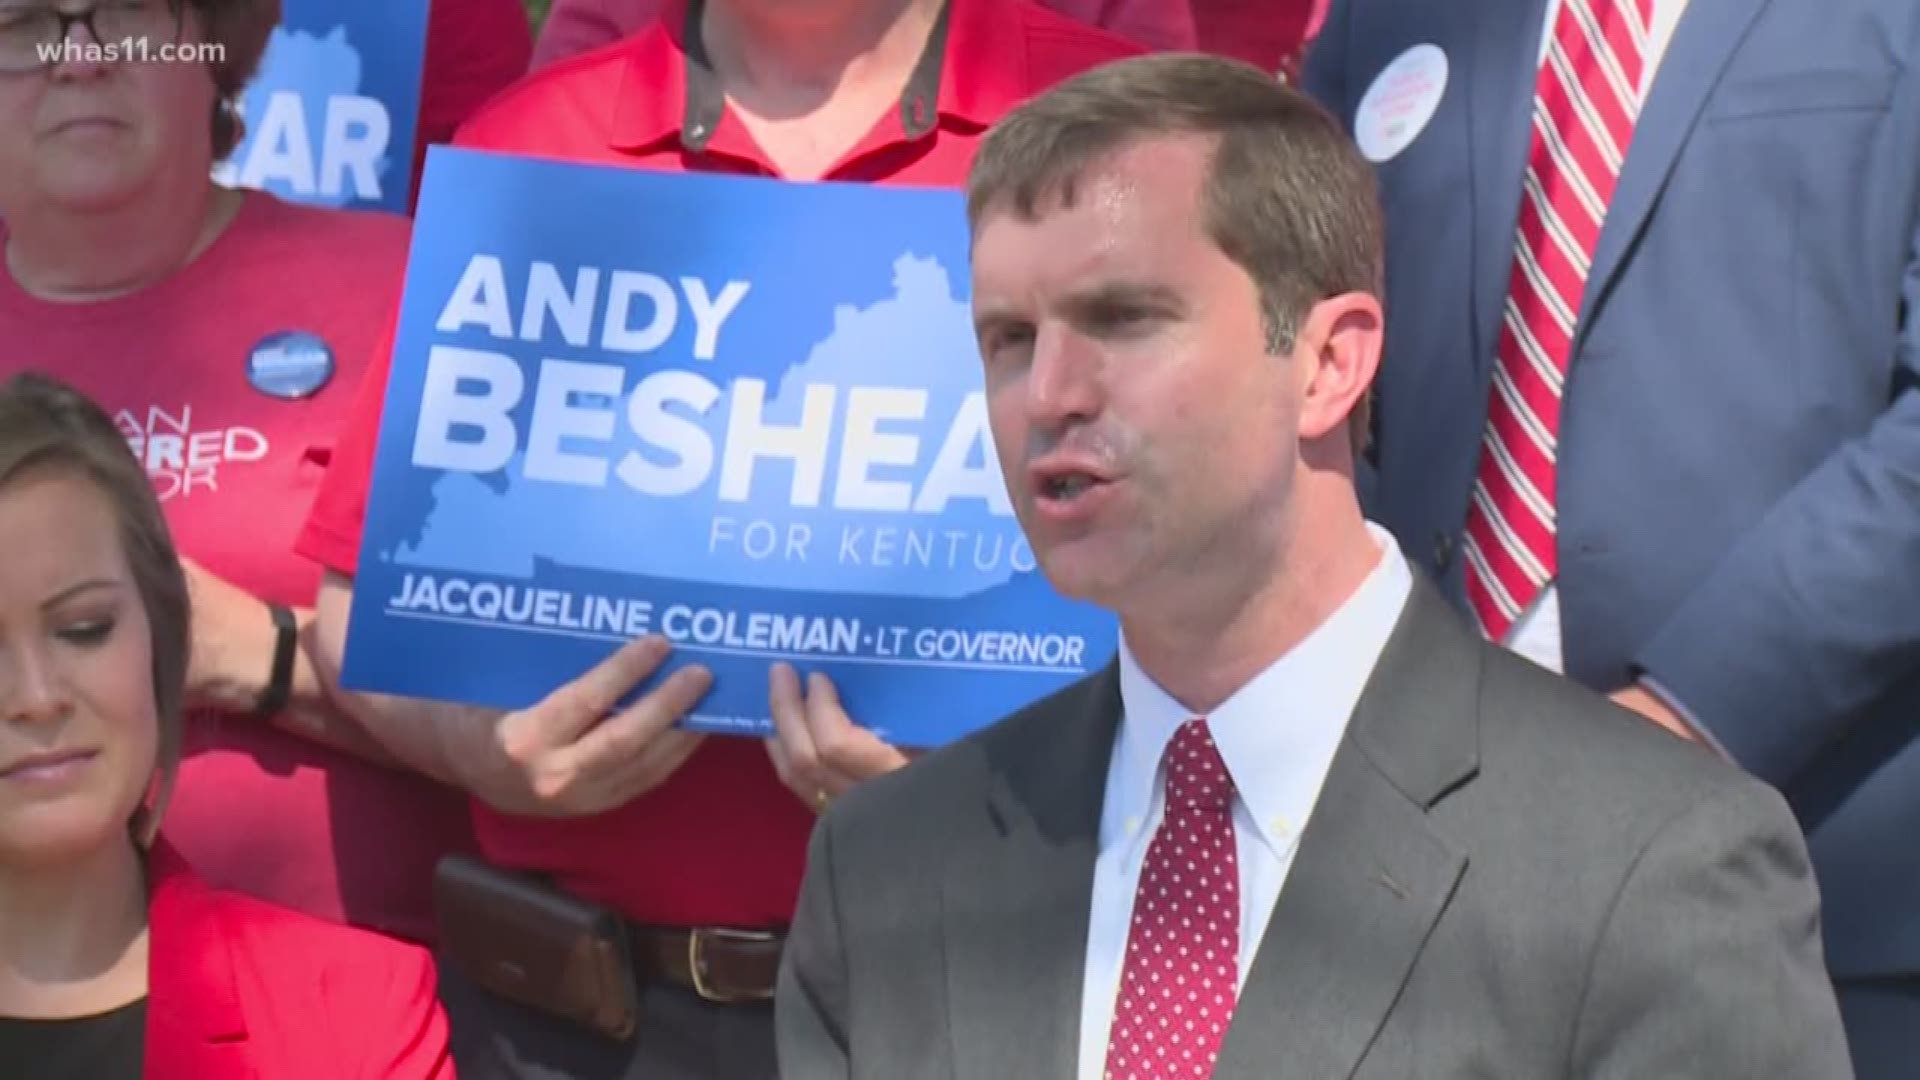 Beshear was announcing his plans for public education at a Wednesday event.